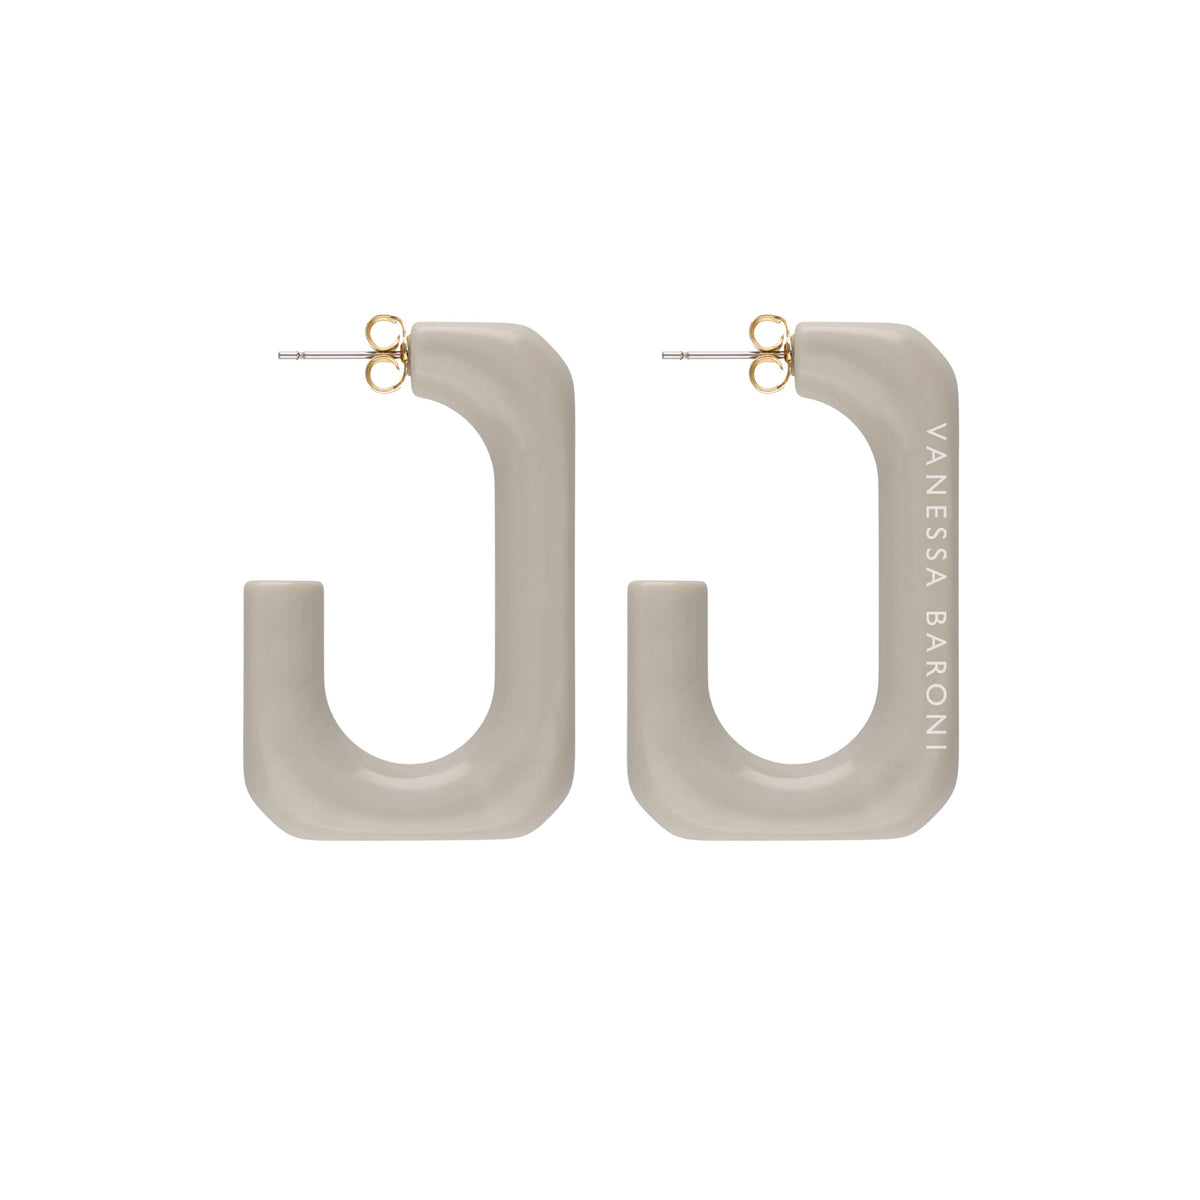 SQUARED Single Earring Small grey